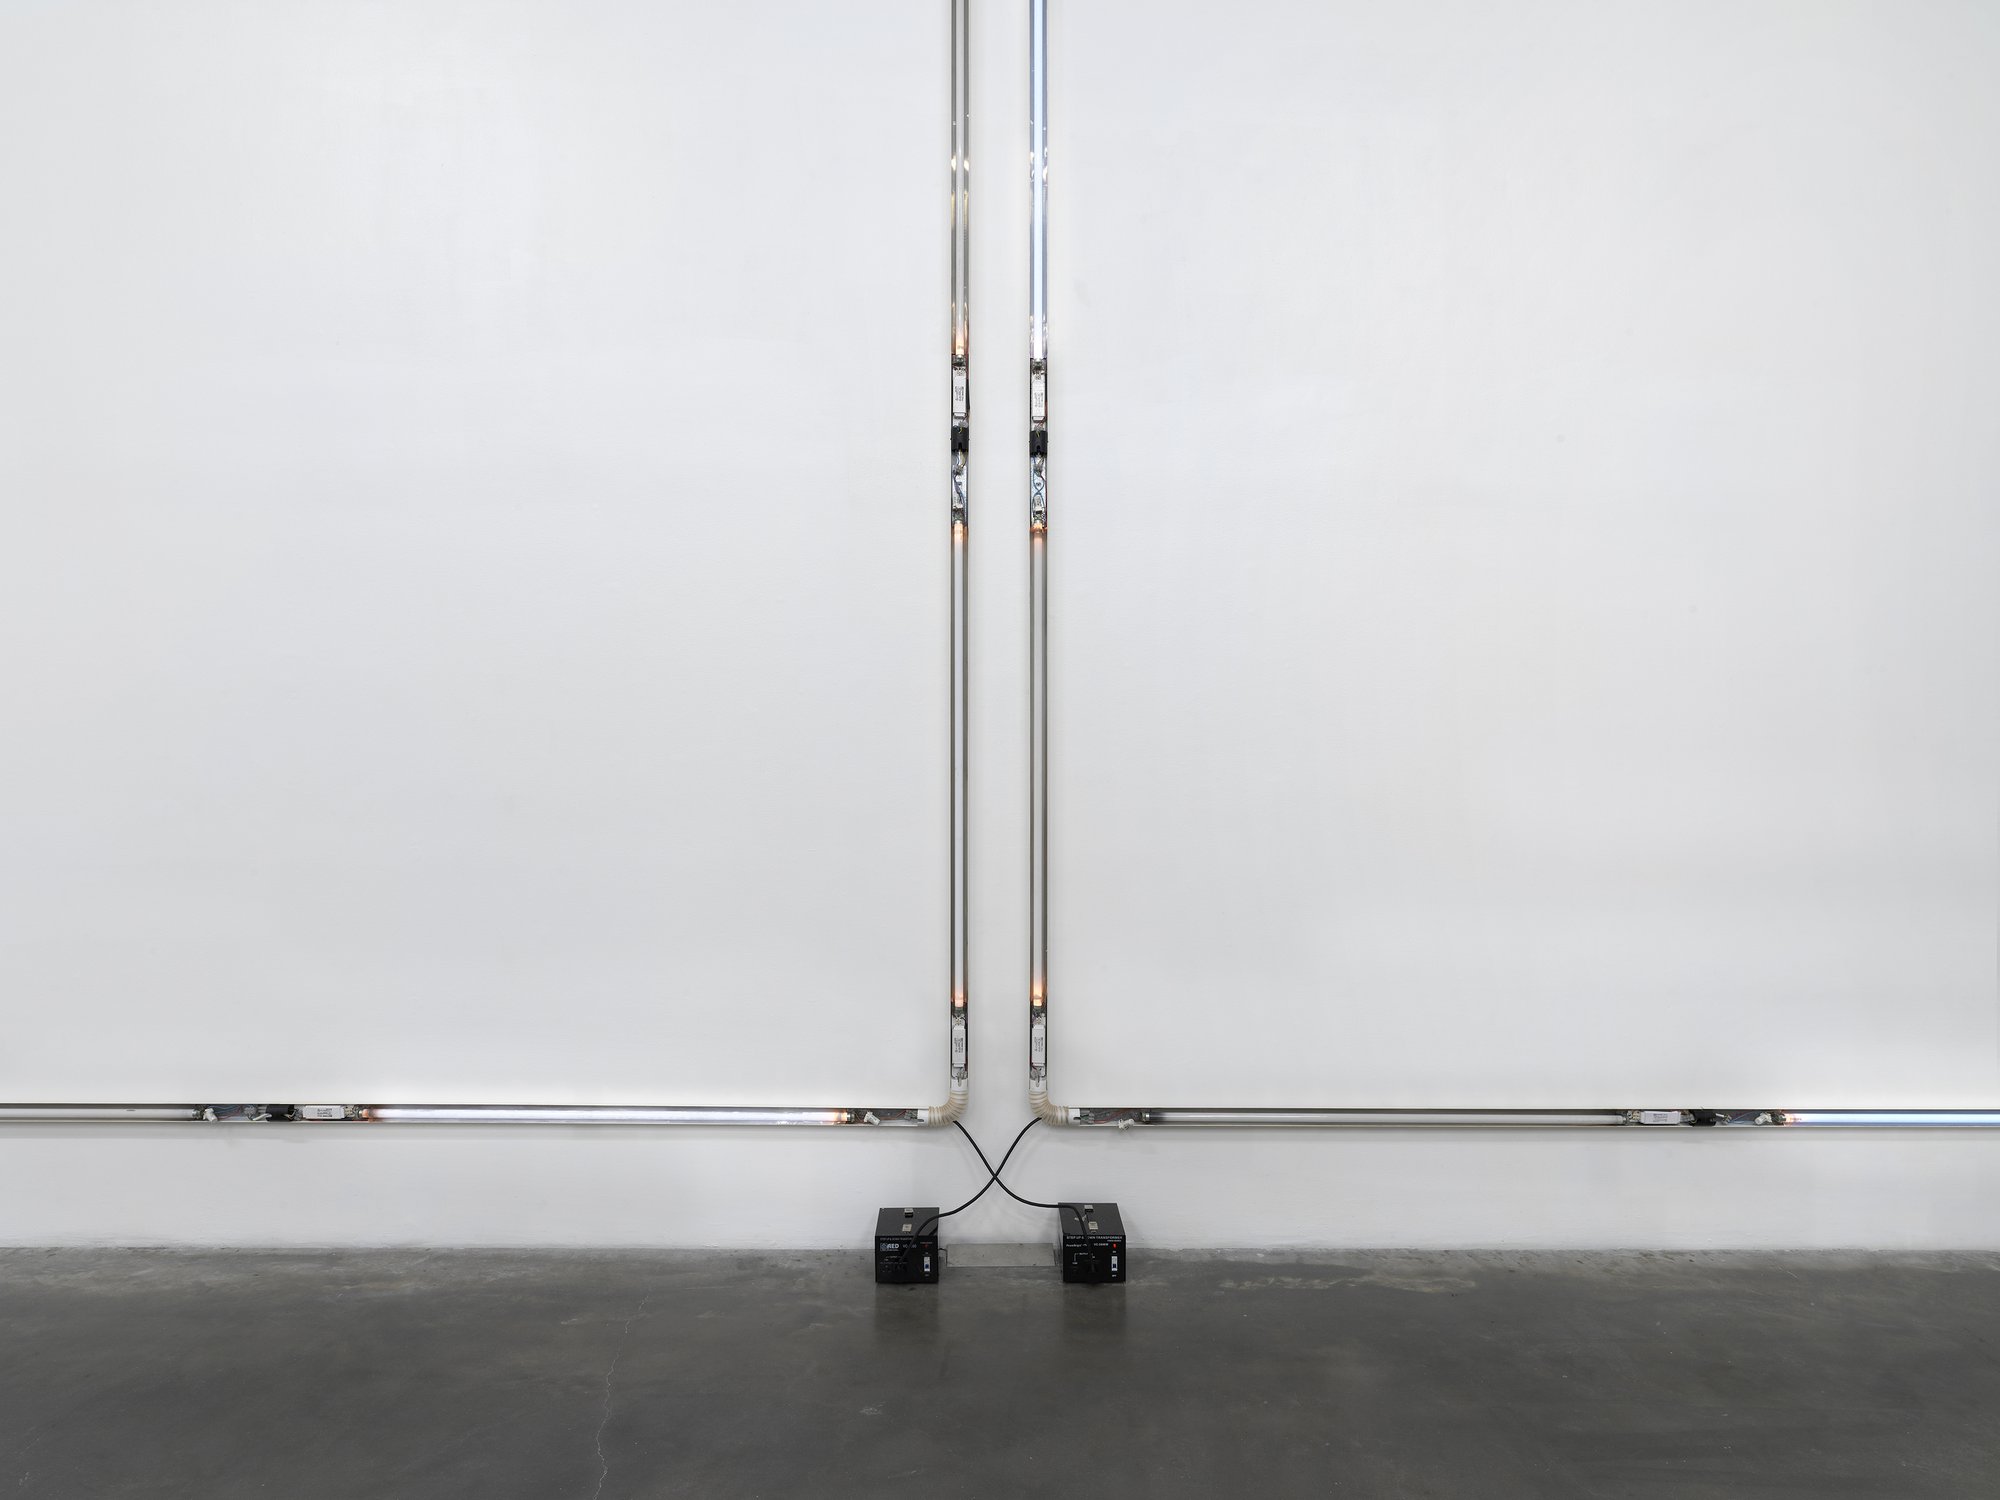 Iris Touliatou, Untitled (Still not over you), ceiling light fixtures, aluminium frame, fluorescents, wires, cable, transformers, 420 x 420 x 8 cm each (165 3/8 x 165 3/8 x 3 1/8 in each), 2021. Installation view, New Museum Triennial, Soft Water Hard Stone, New Museum, New York, 2021